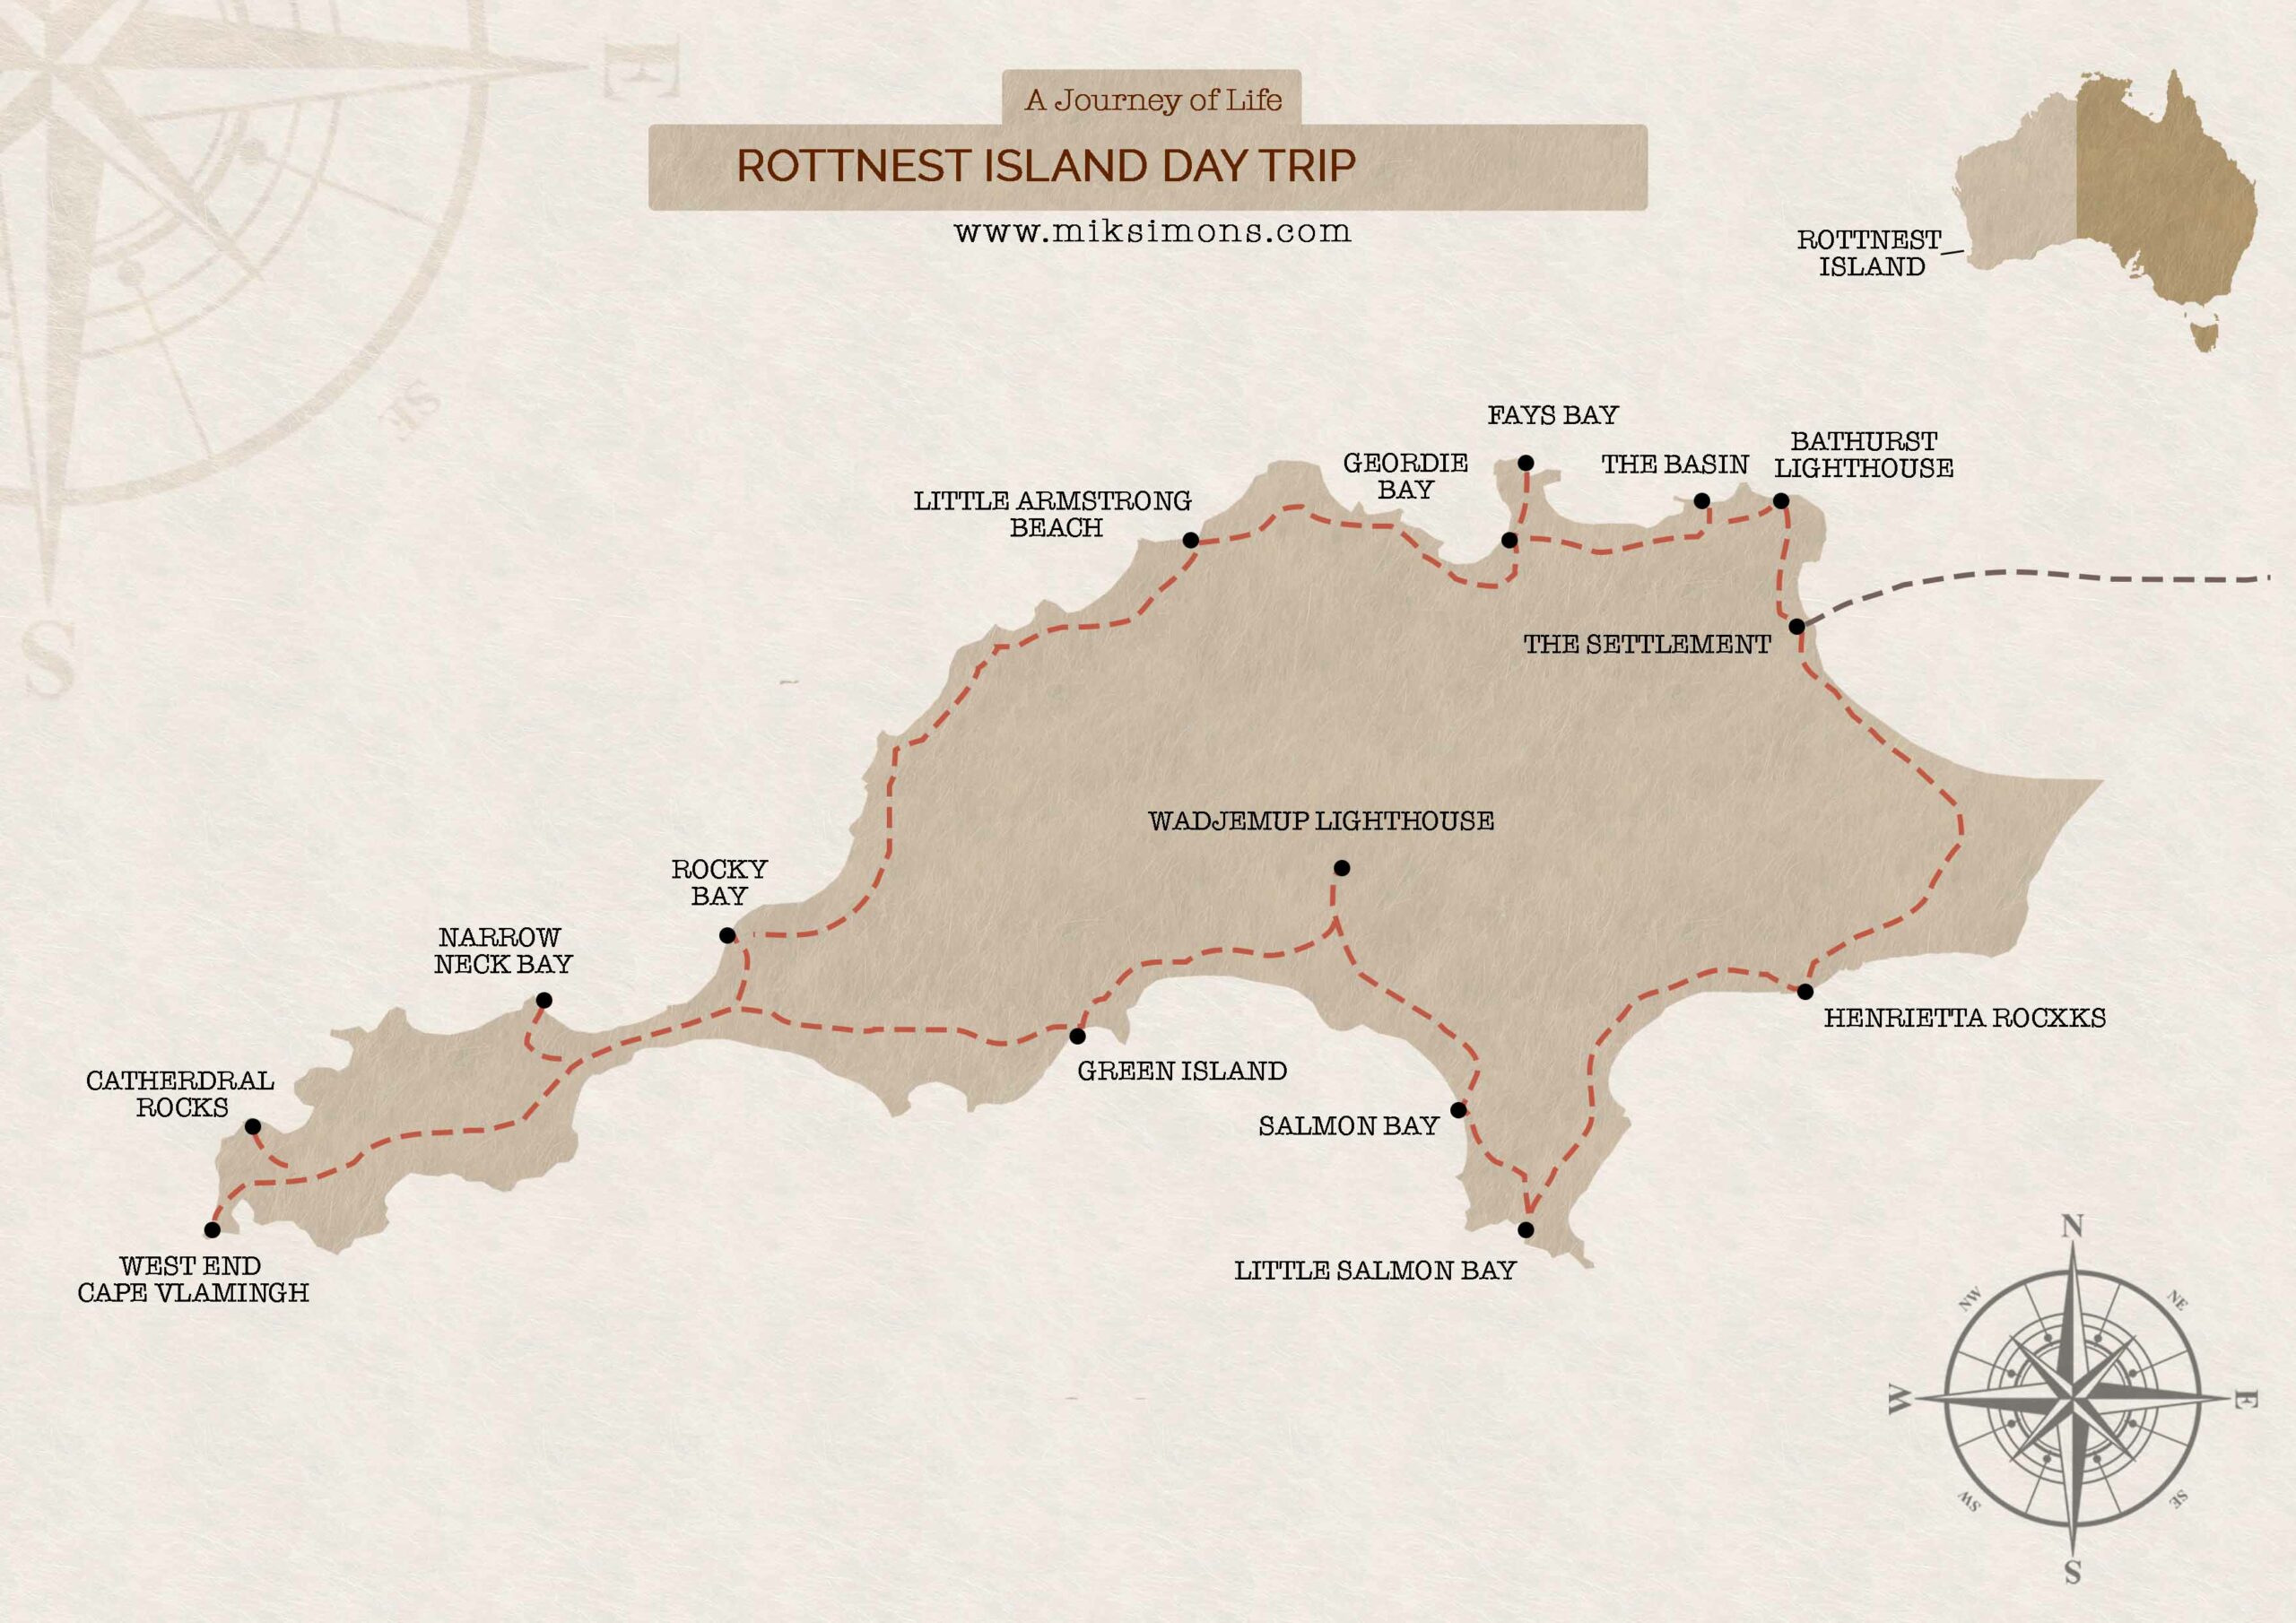 Map of Rottnest Island - the best day trip to Rottnest Island